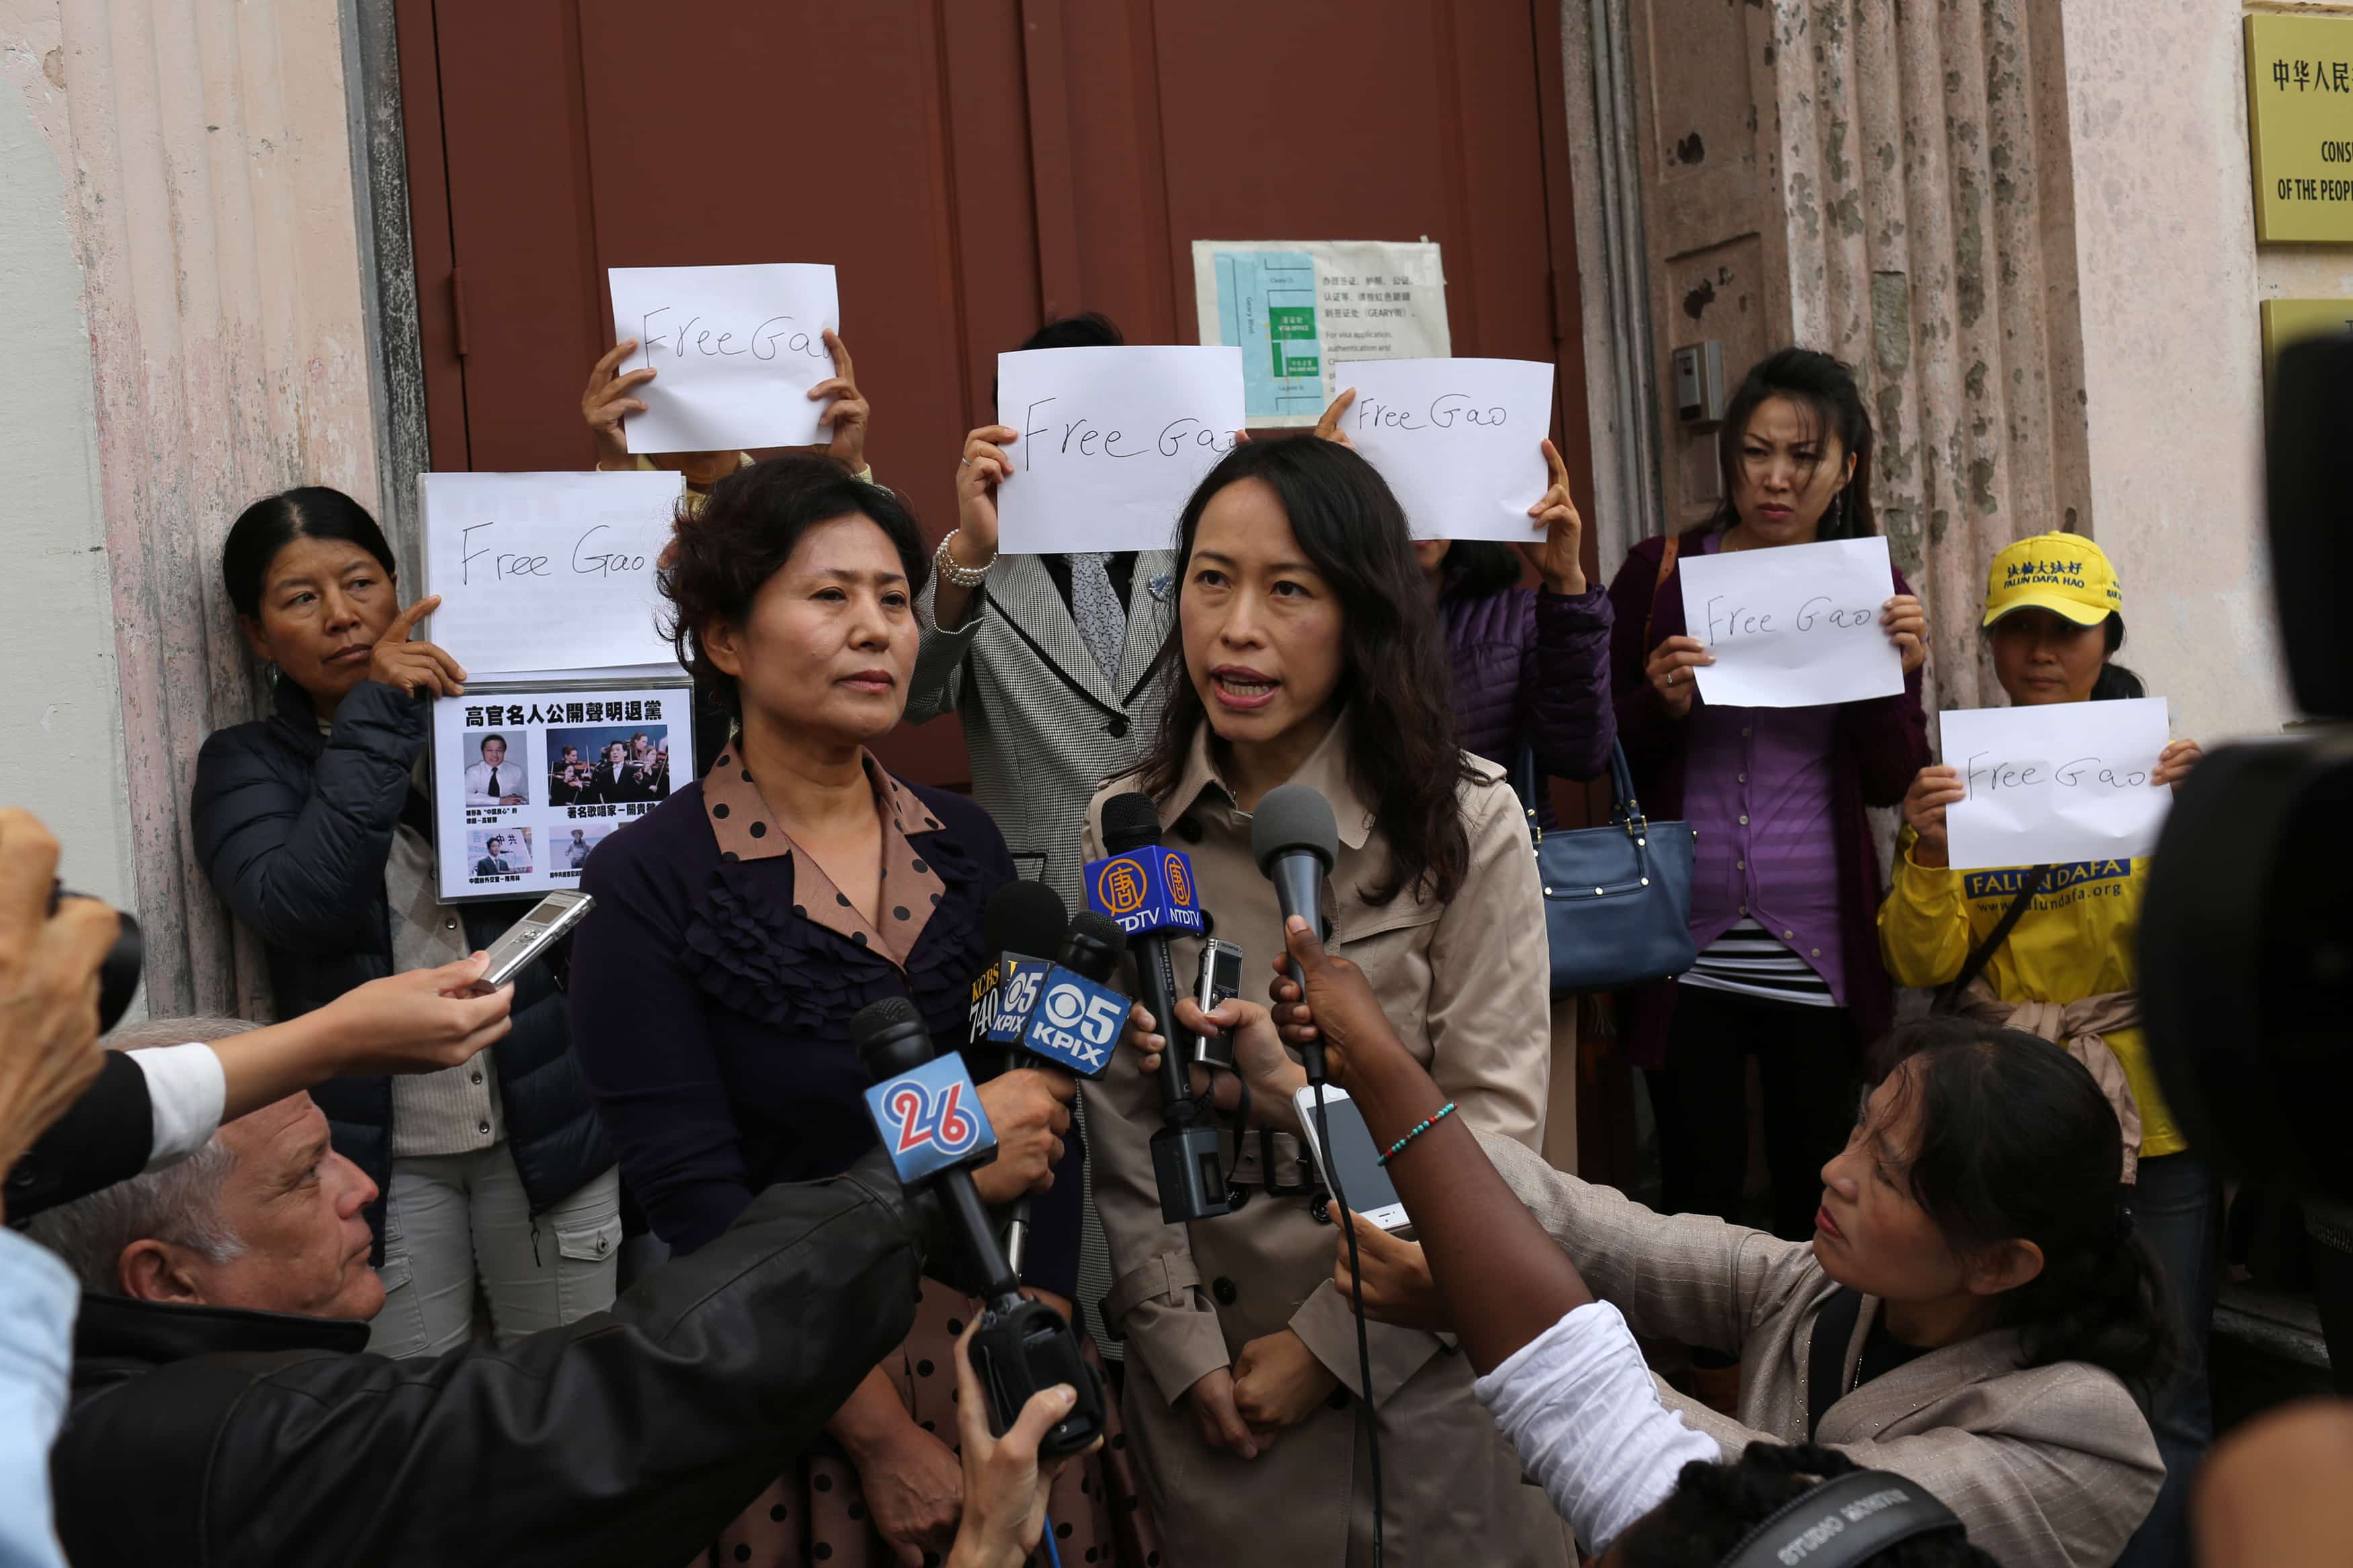 Geng He (L), wife of Gao Zhisheng, speaks through her interpreter, Sherry Zhang, at a news conference at the Chinese Consulate in San Francisco, California, 7 August 2014, REUTERS/Robert Galbraith